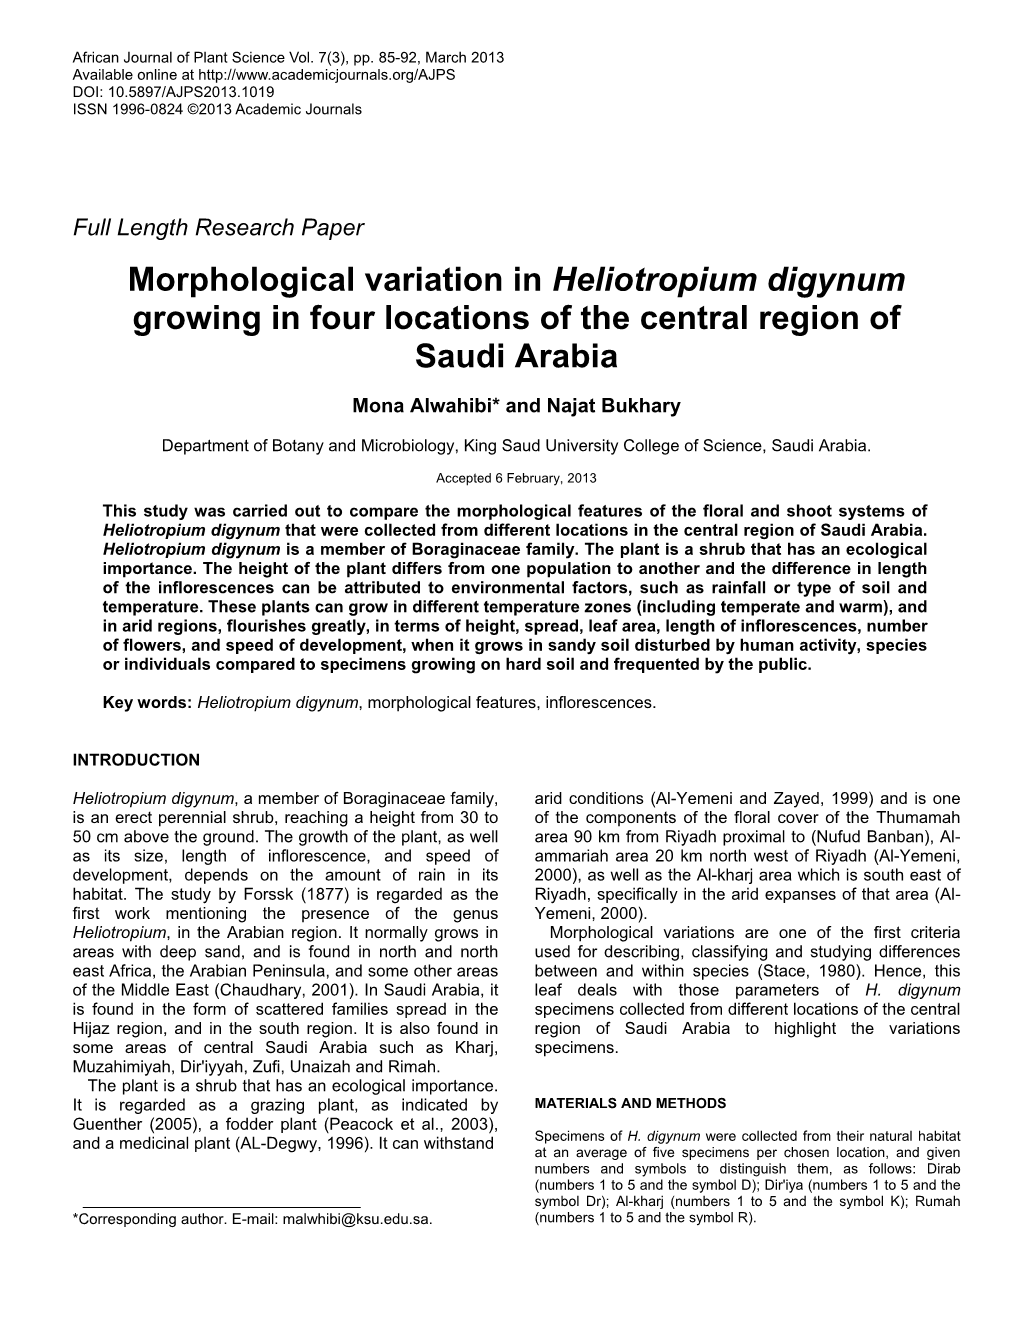 Morphological Variation in Heliotropium Digynum Growing in Four Locations of the Central Region of Saudi Arabia